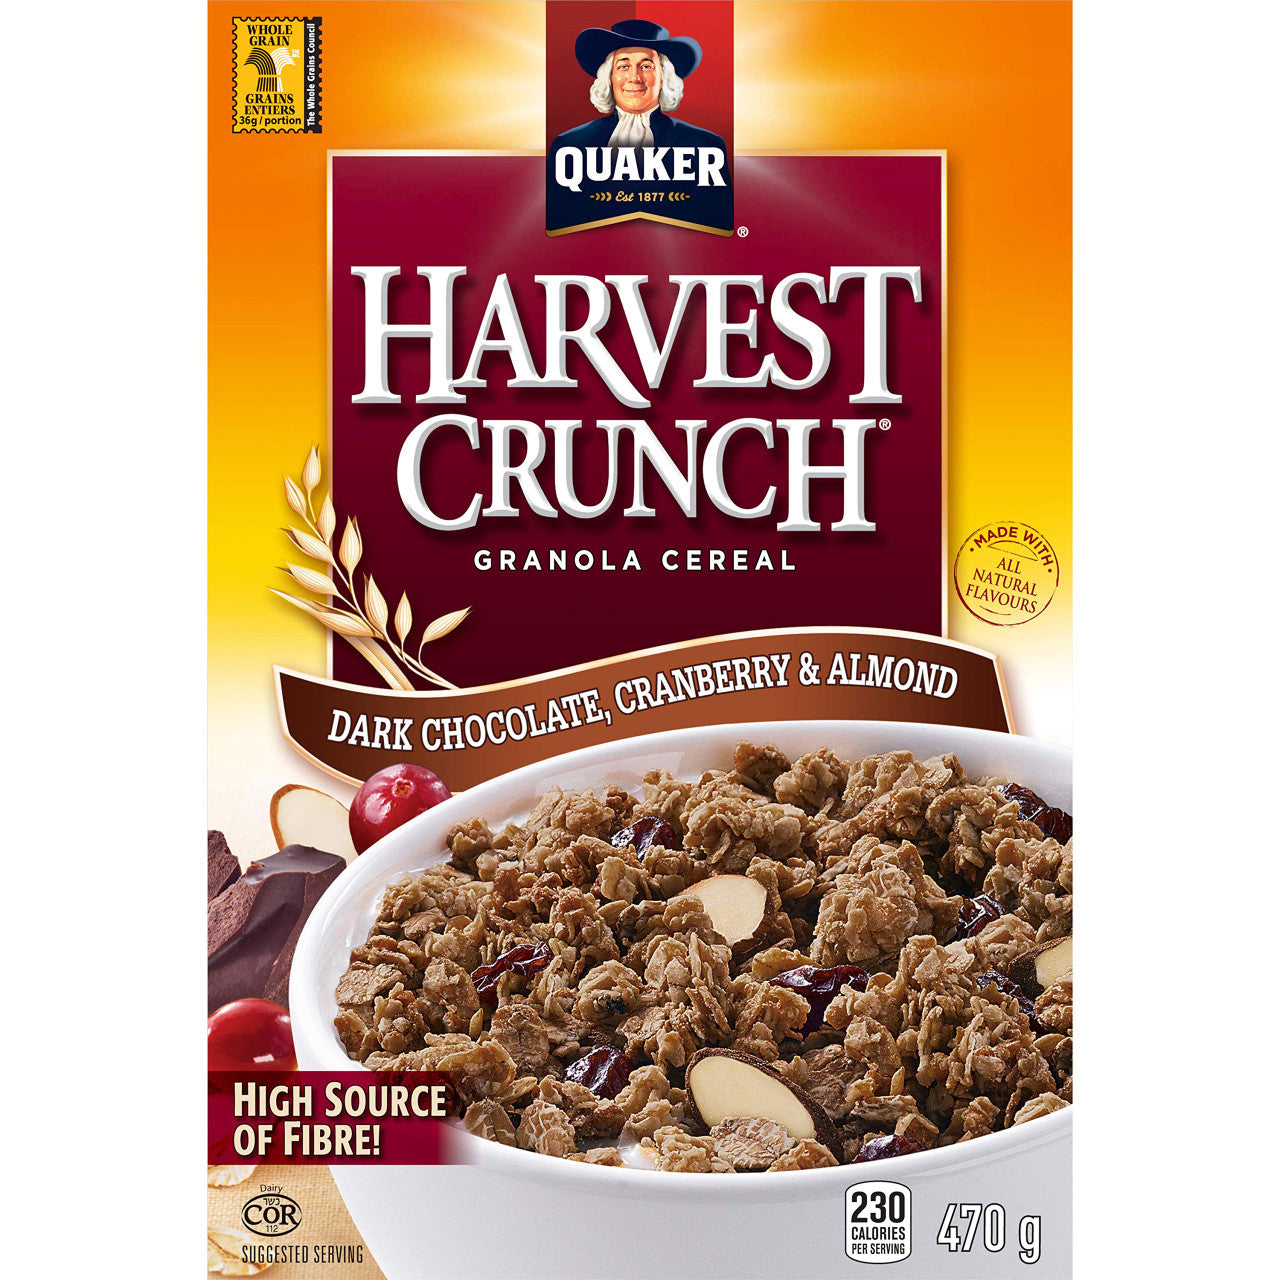 Quaker Harvest Crunch, Dark Chocolate, Cranberry & Almond Cereal 550g/19.4oz. (Imported from Canada)